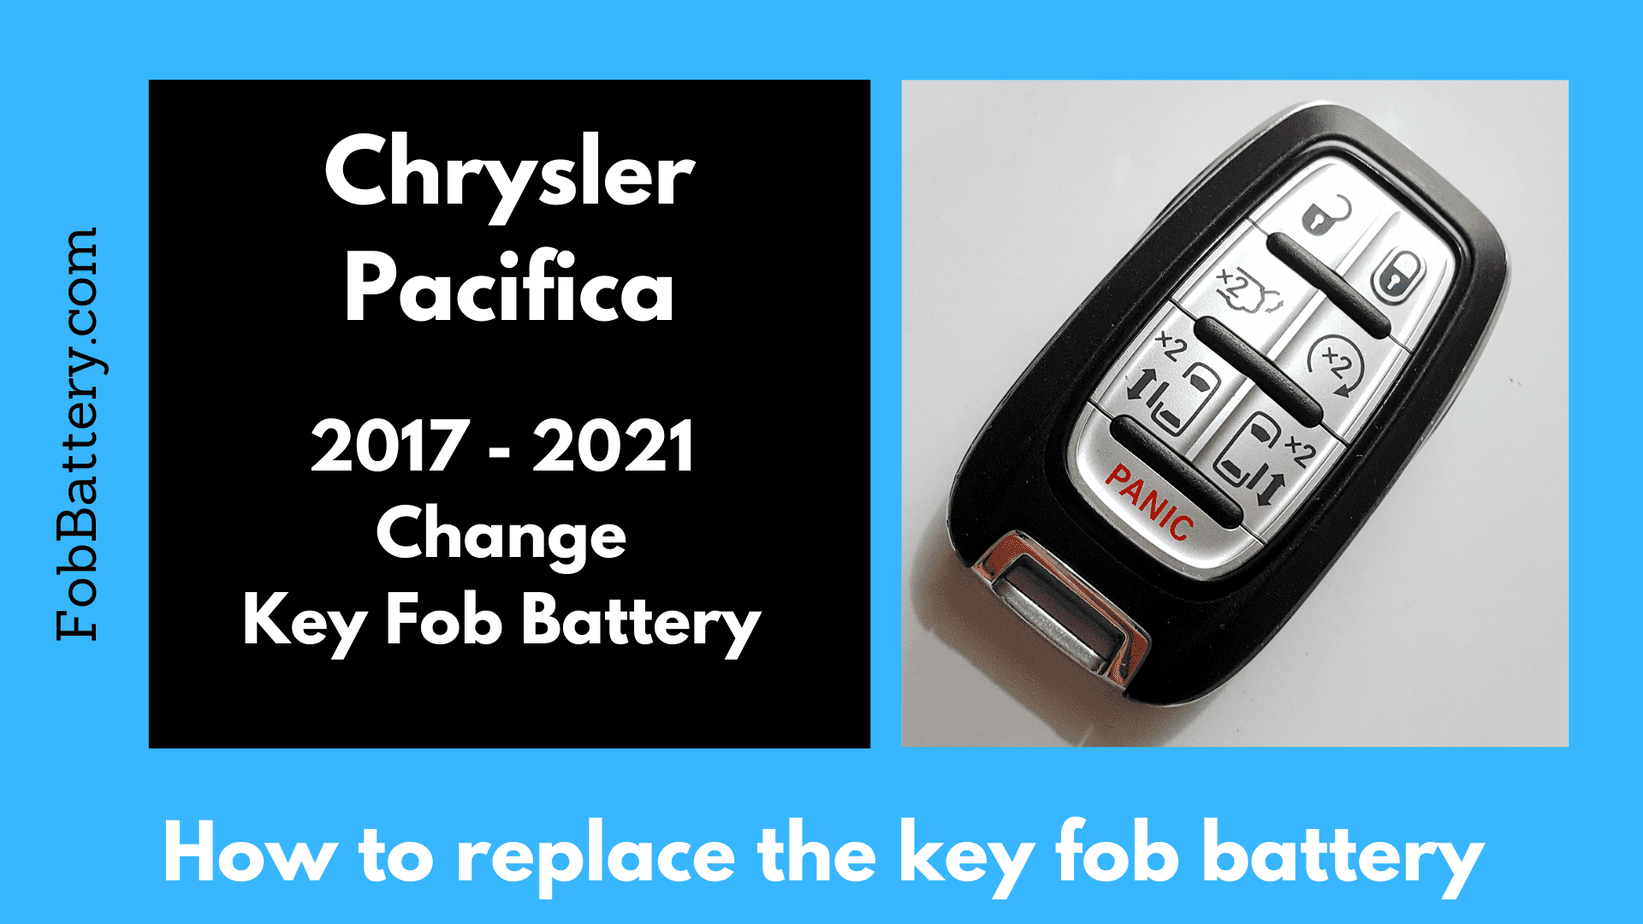 Chrysler Pacifica key fob battery replacement